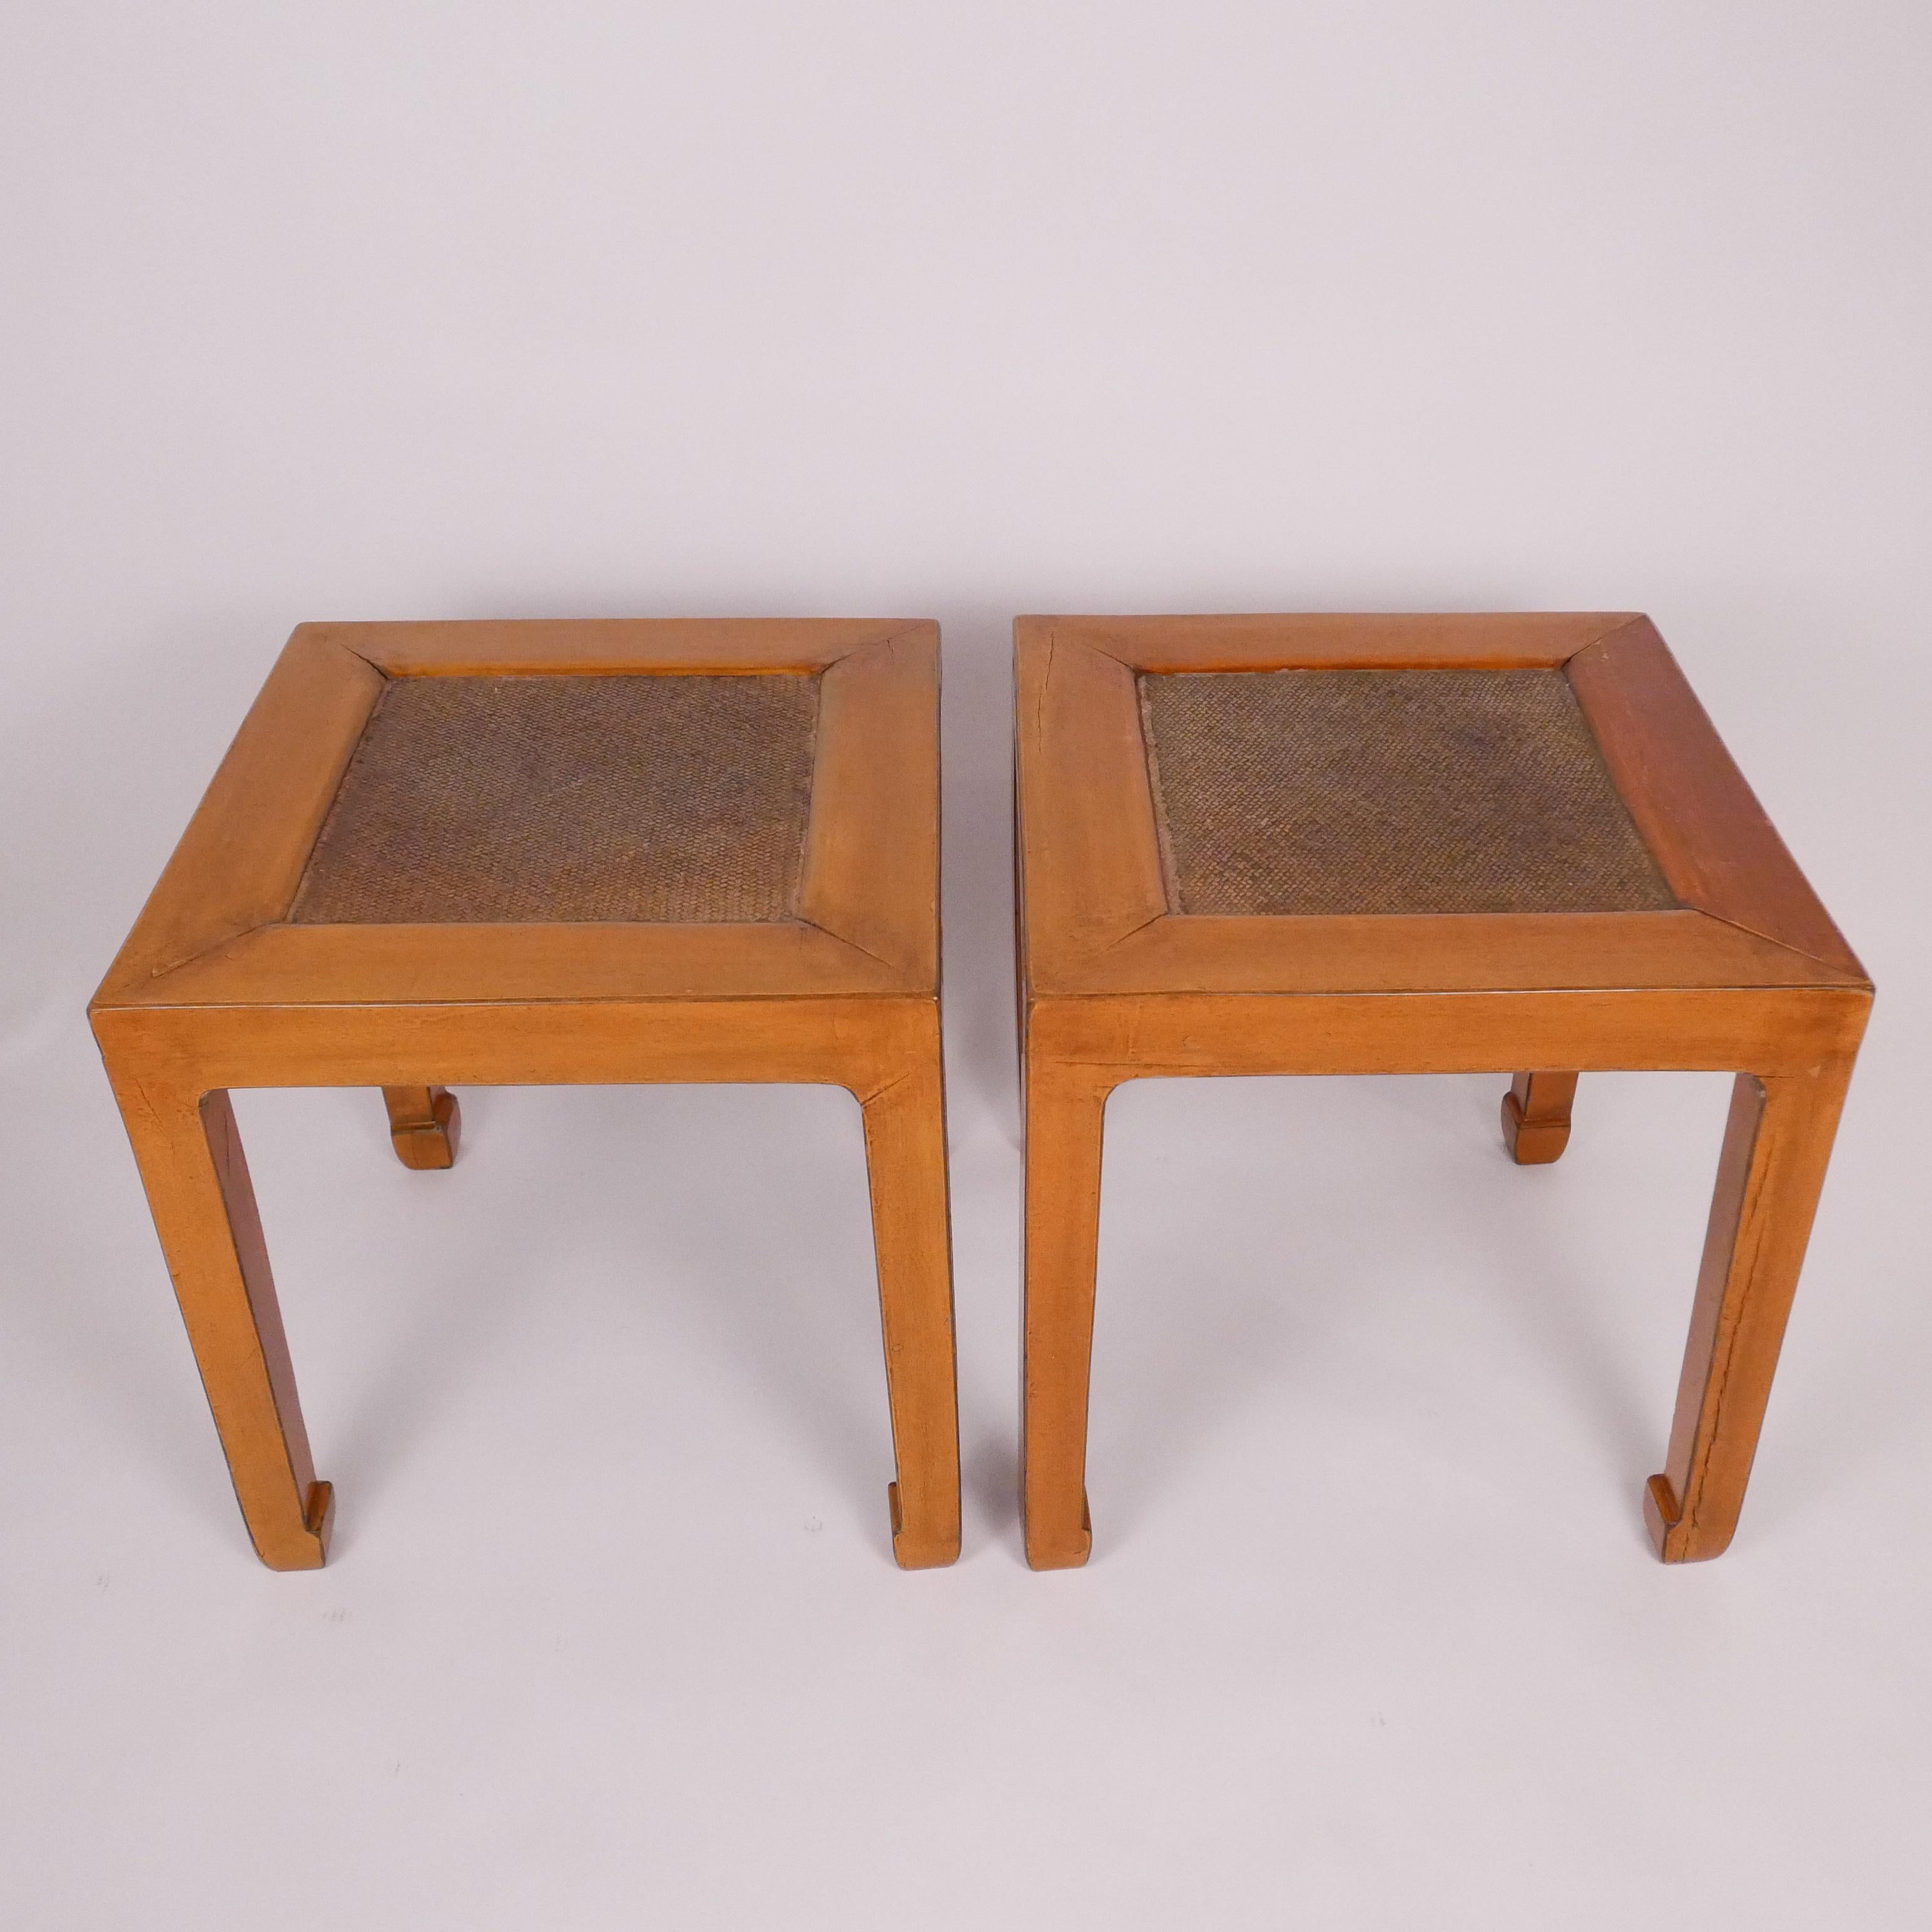 Chinoiserie Pair of Chinese Midcentury Modern Lacquer and Rattan Low Tables